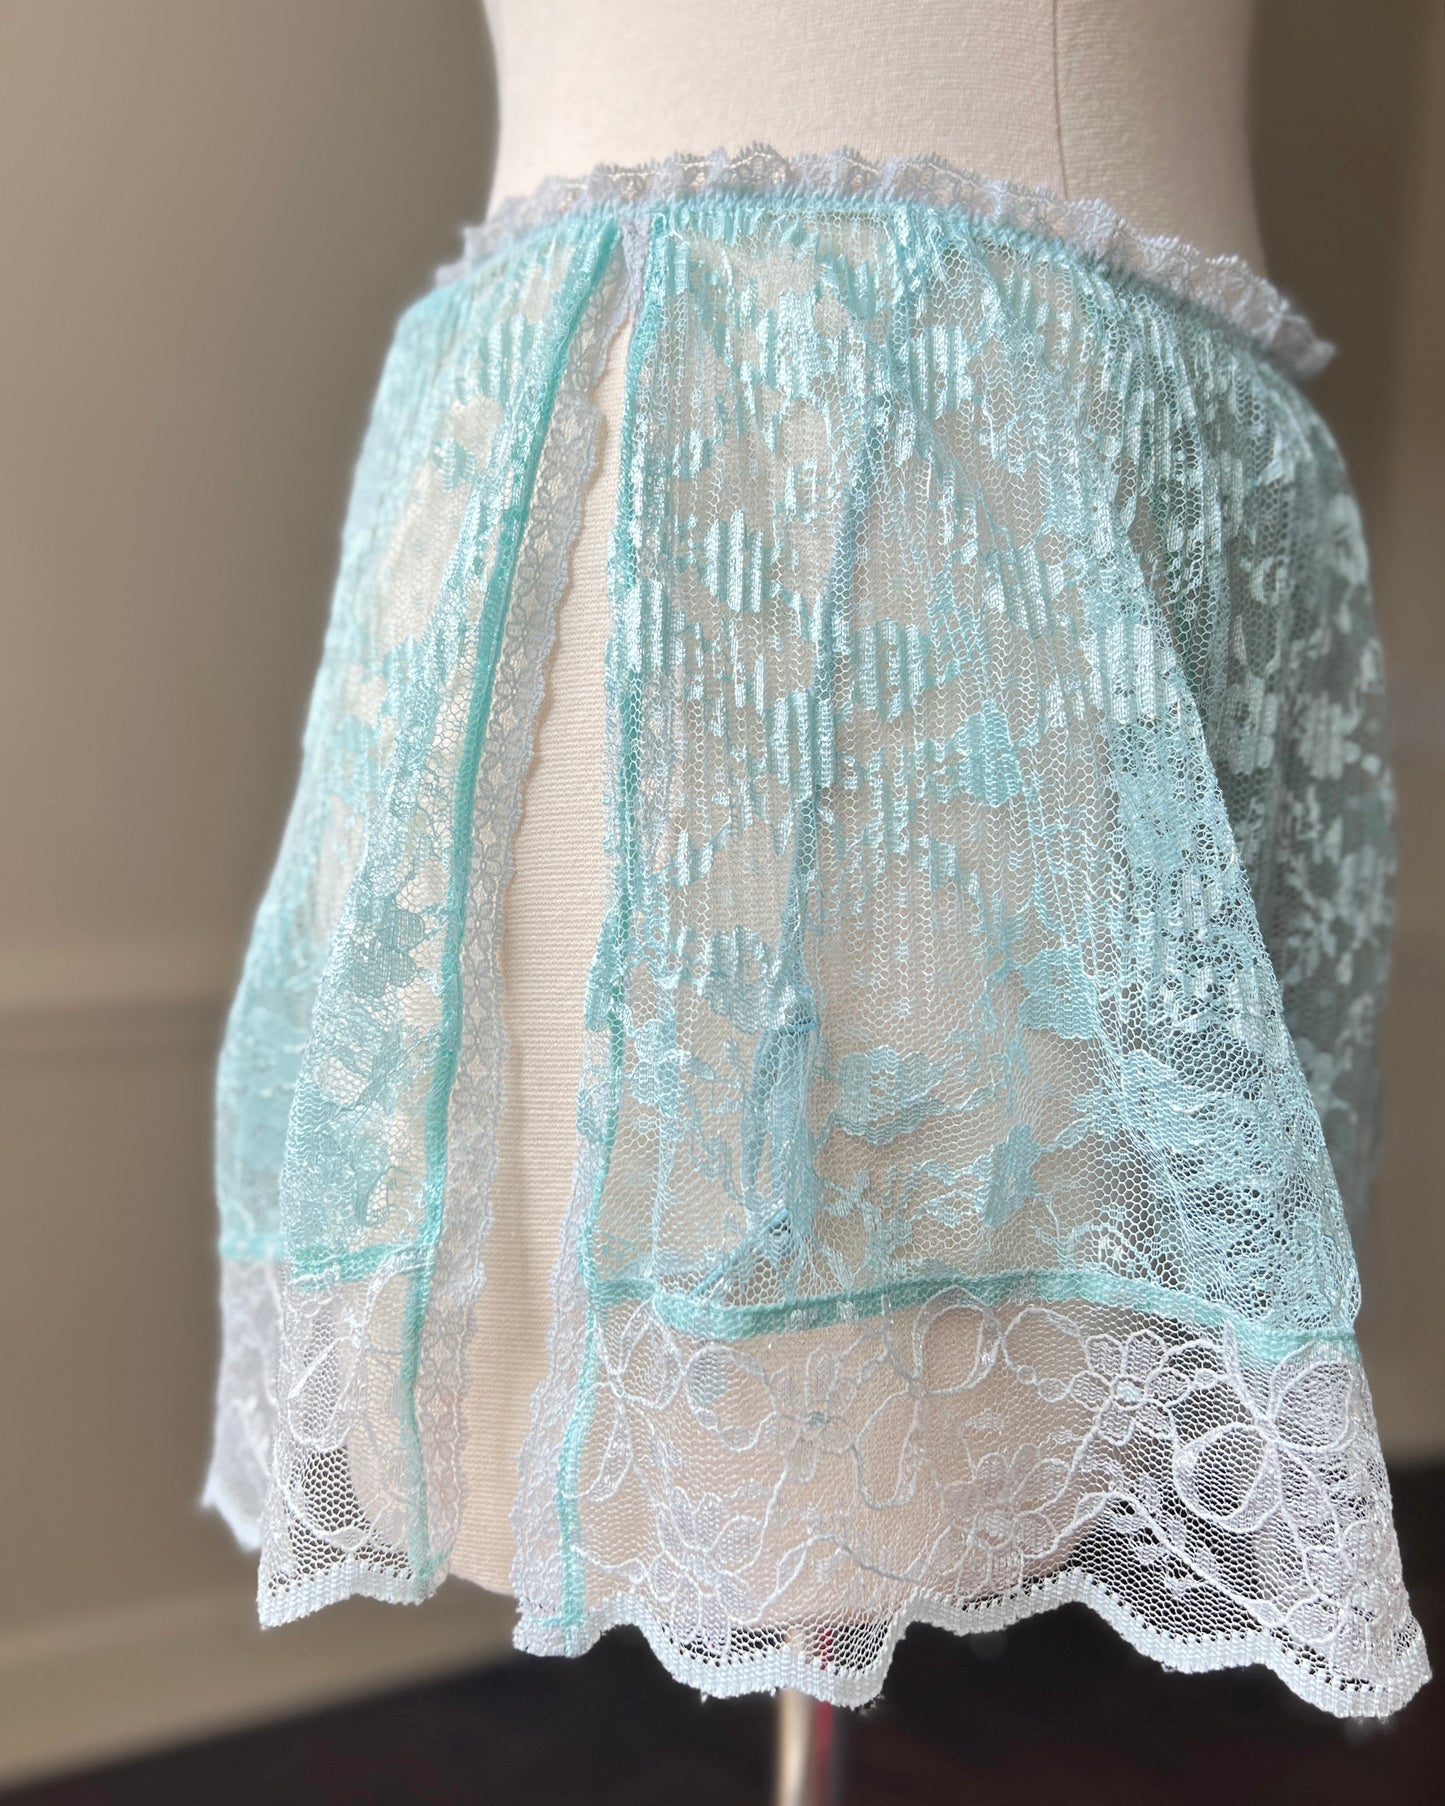 Victoria’s Secret frosty fairy split skirt featuring layered floral lace